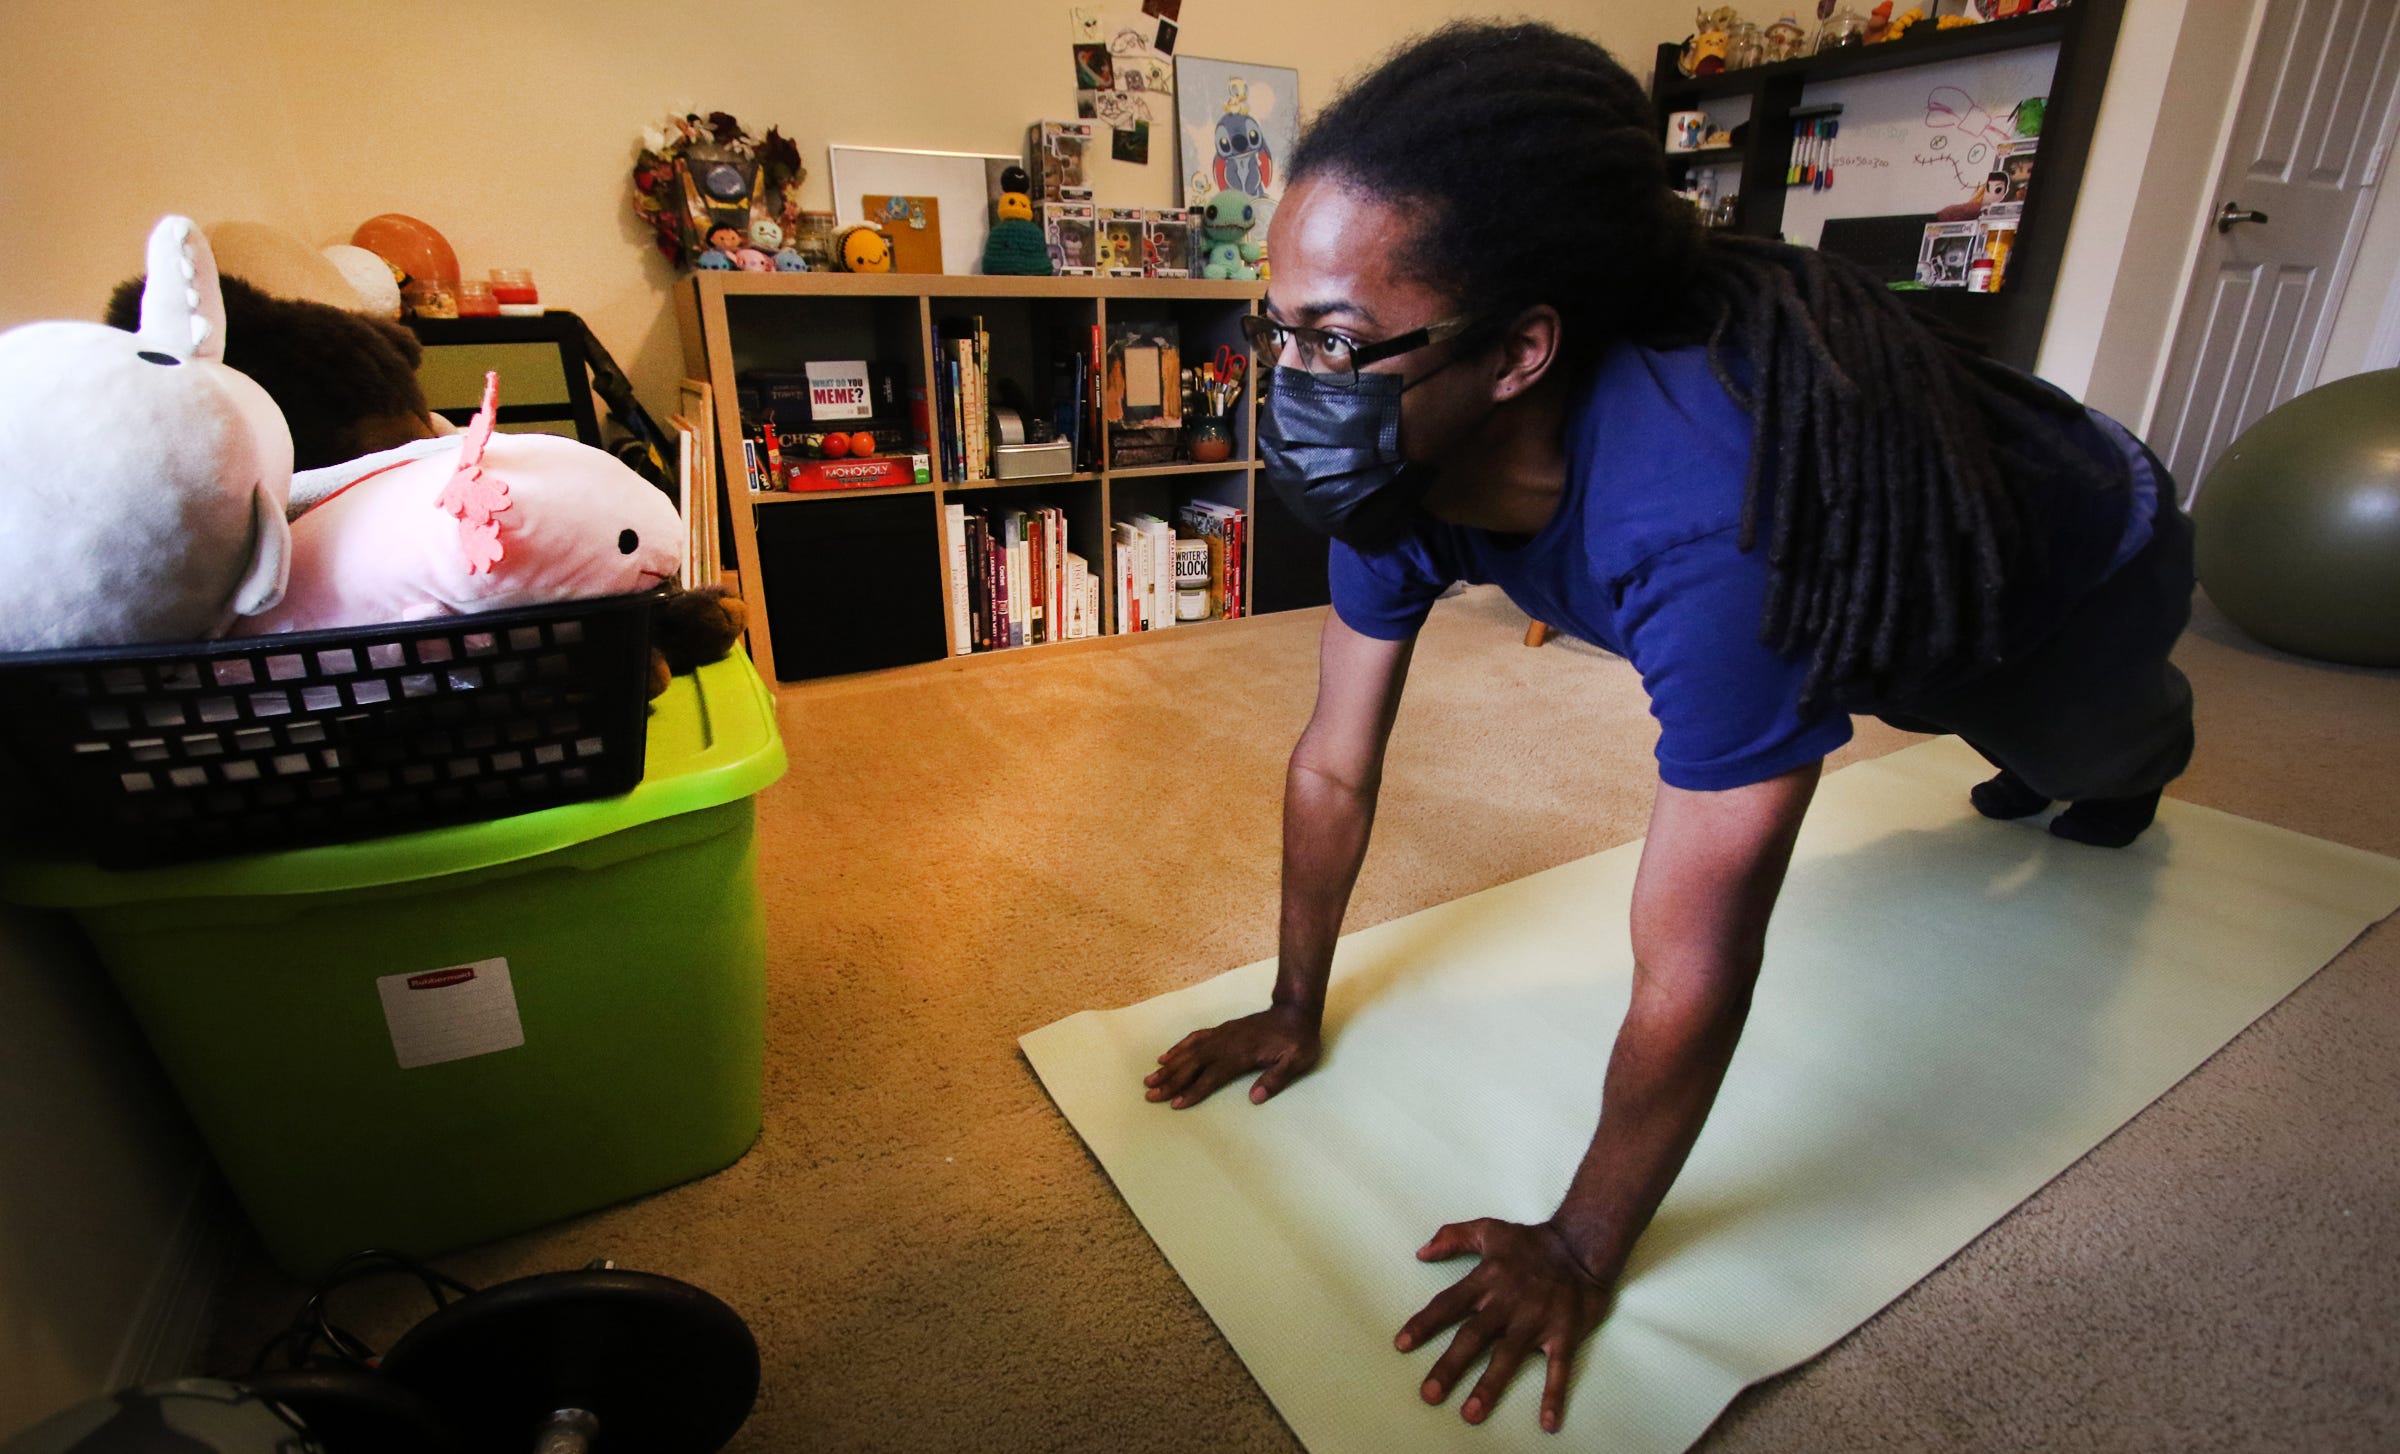 Lyn Holland, 28, practices meditation in an apartment in Gastonia, North Carolina, he was about to lose in March. Holland doesn’t work regularly because of sickle cell anemia, a blood disorder that often clenches his body with pain and repeatedly sends him to the emergency room. And for his housing, he and his girlfriend need an apartment with two rooms because Holland's mental illness means there are times he has to isolate himself for his health and those who live with him.